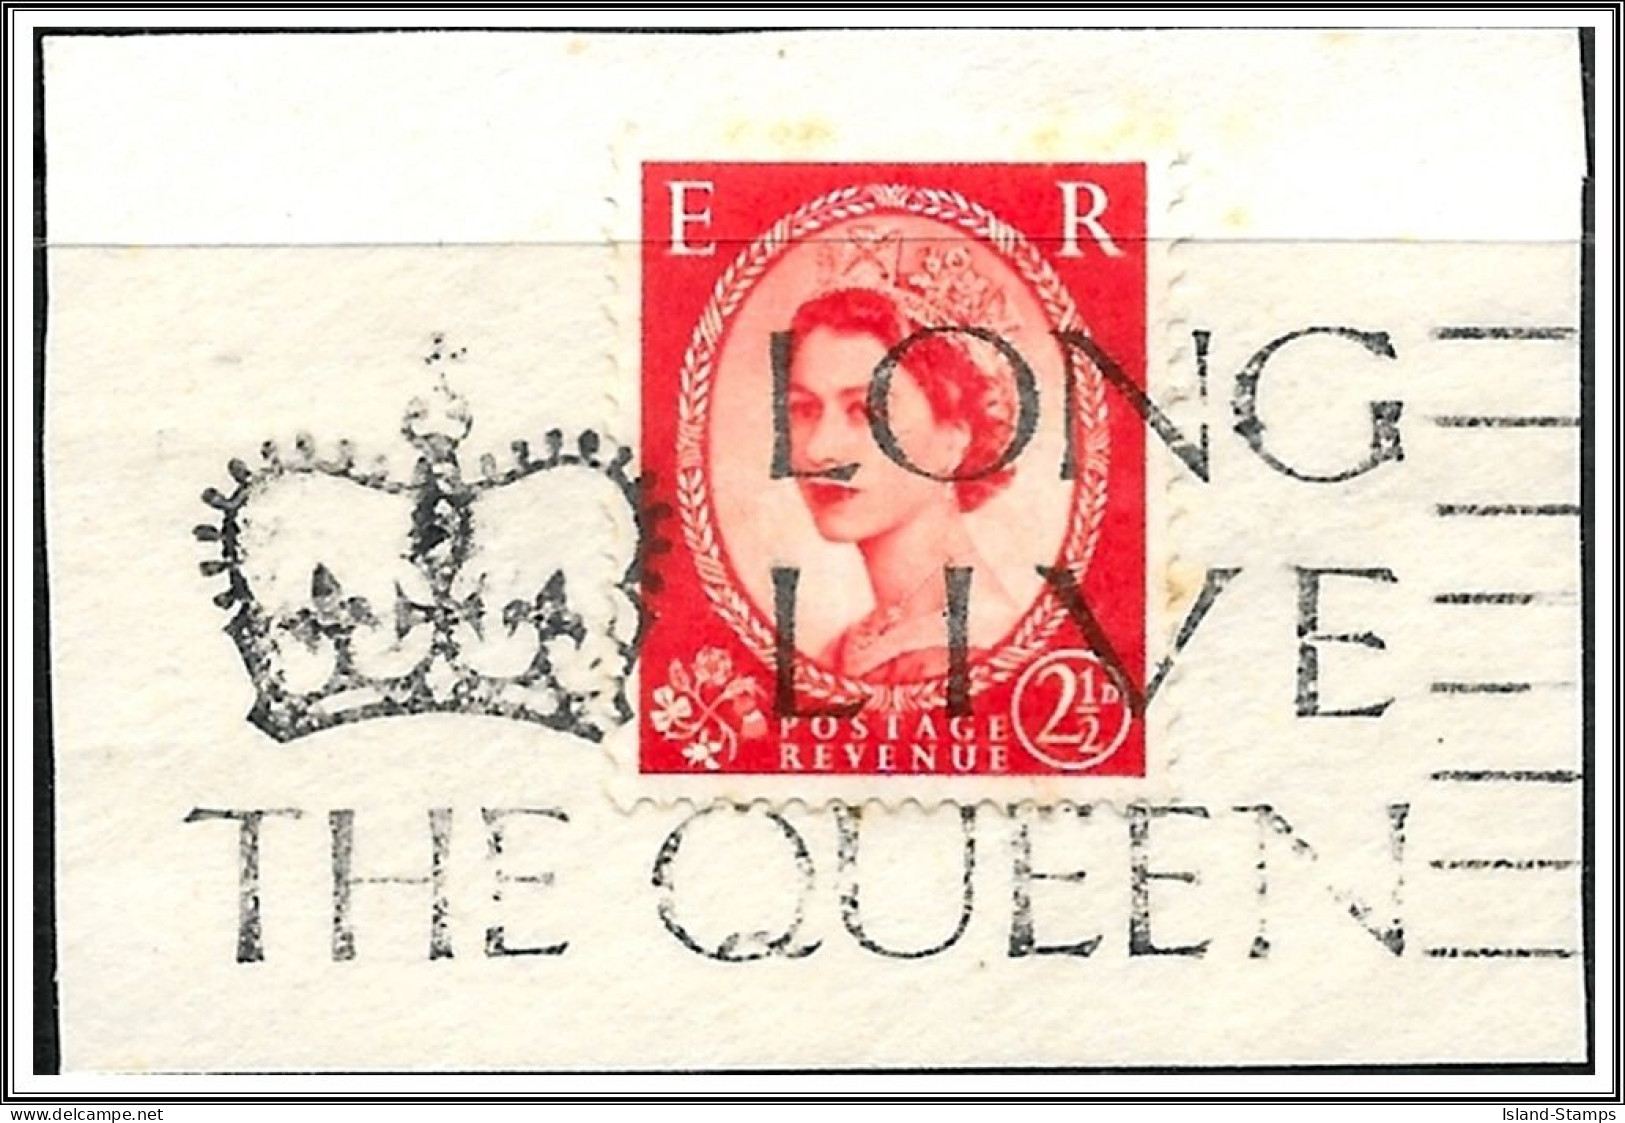 QEII Pre Decimal Wilding Definitive 2 1/2d Used On Piece Hrd2a - Used Stamps